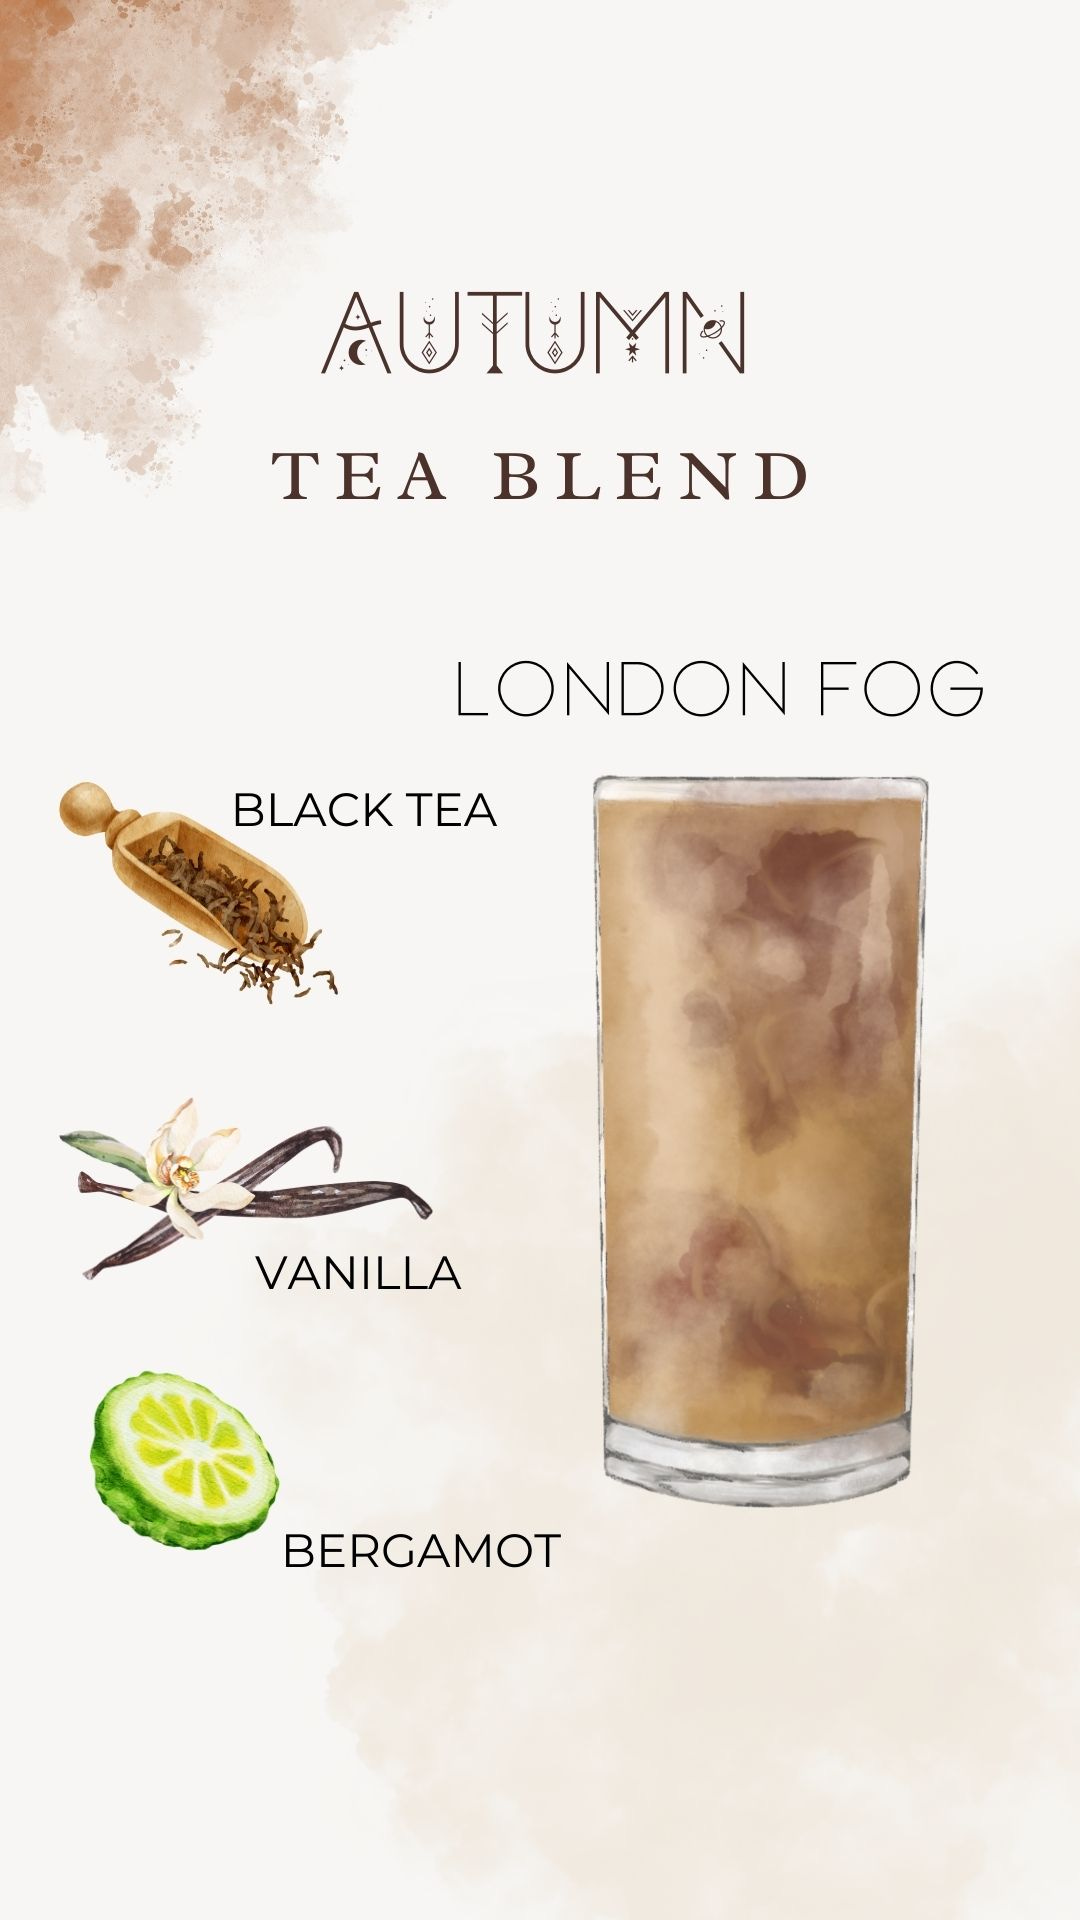 This is a watercolour illustration of a glass of London fog beverage with it's ingredients listen on the side, black tea, vanilla, and bergamot.